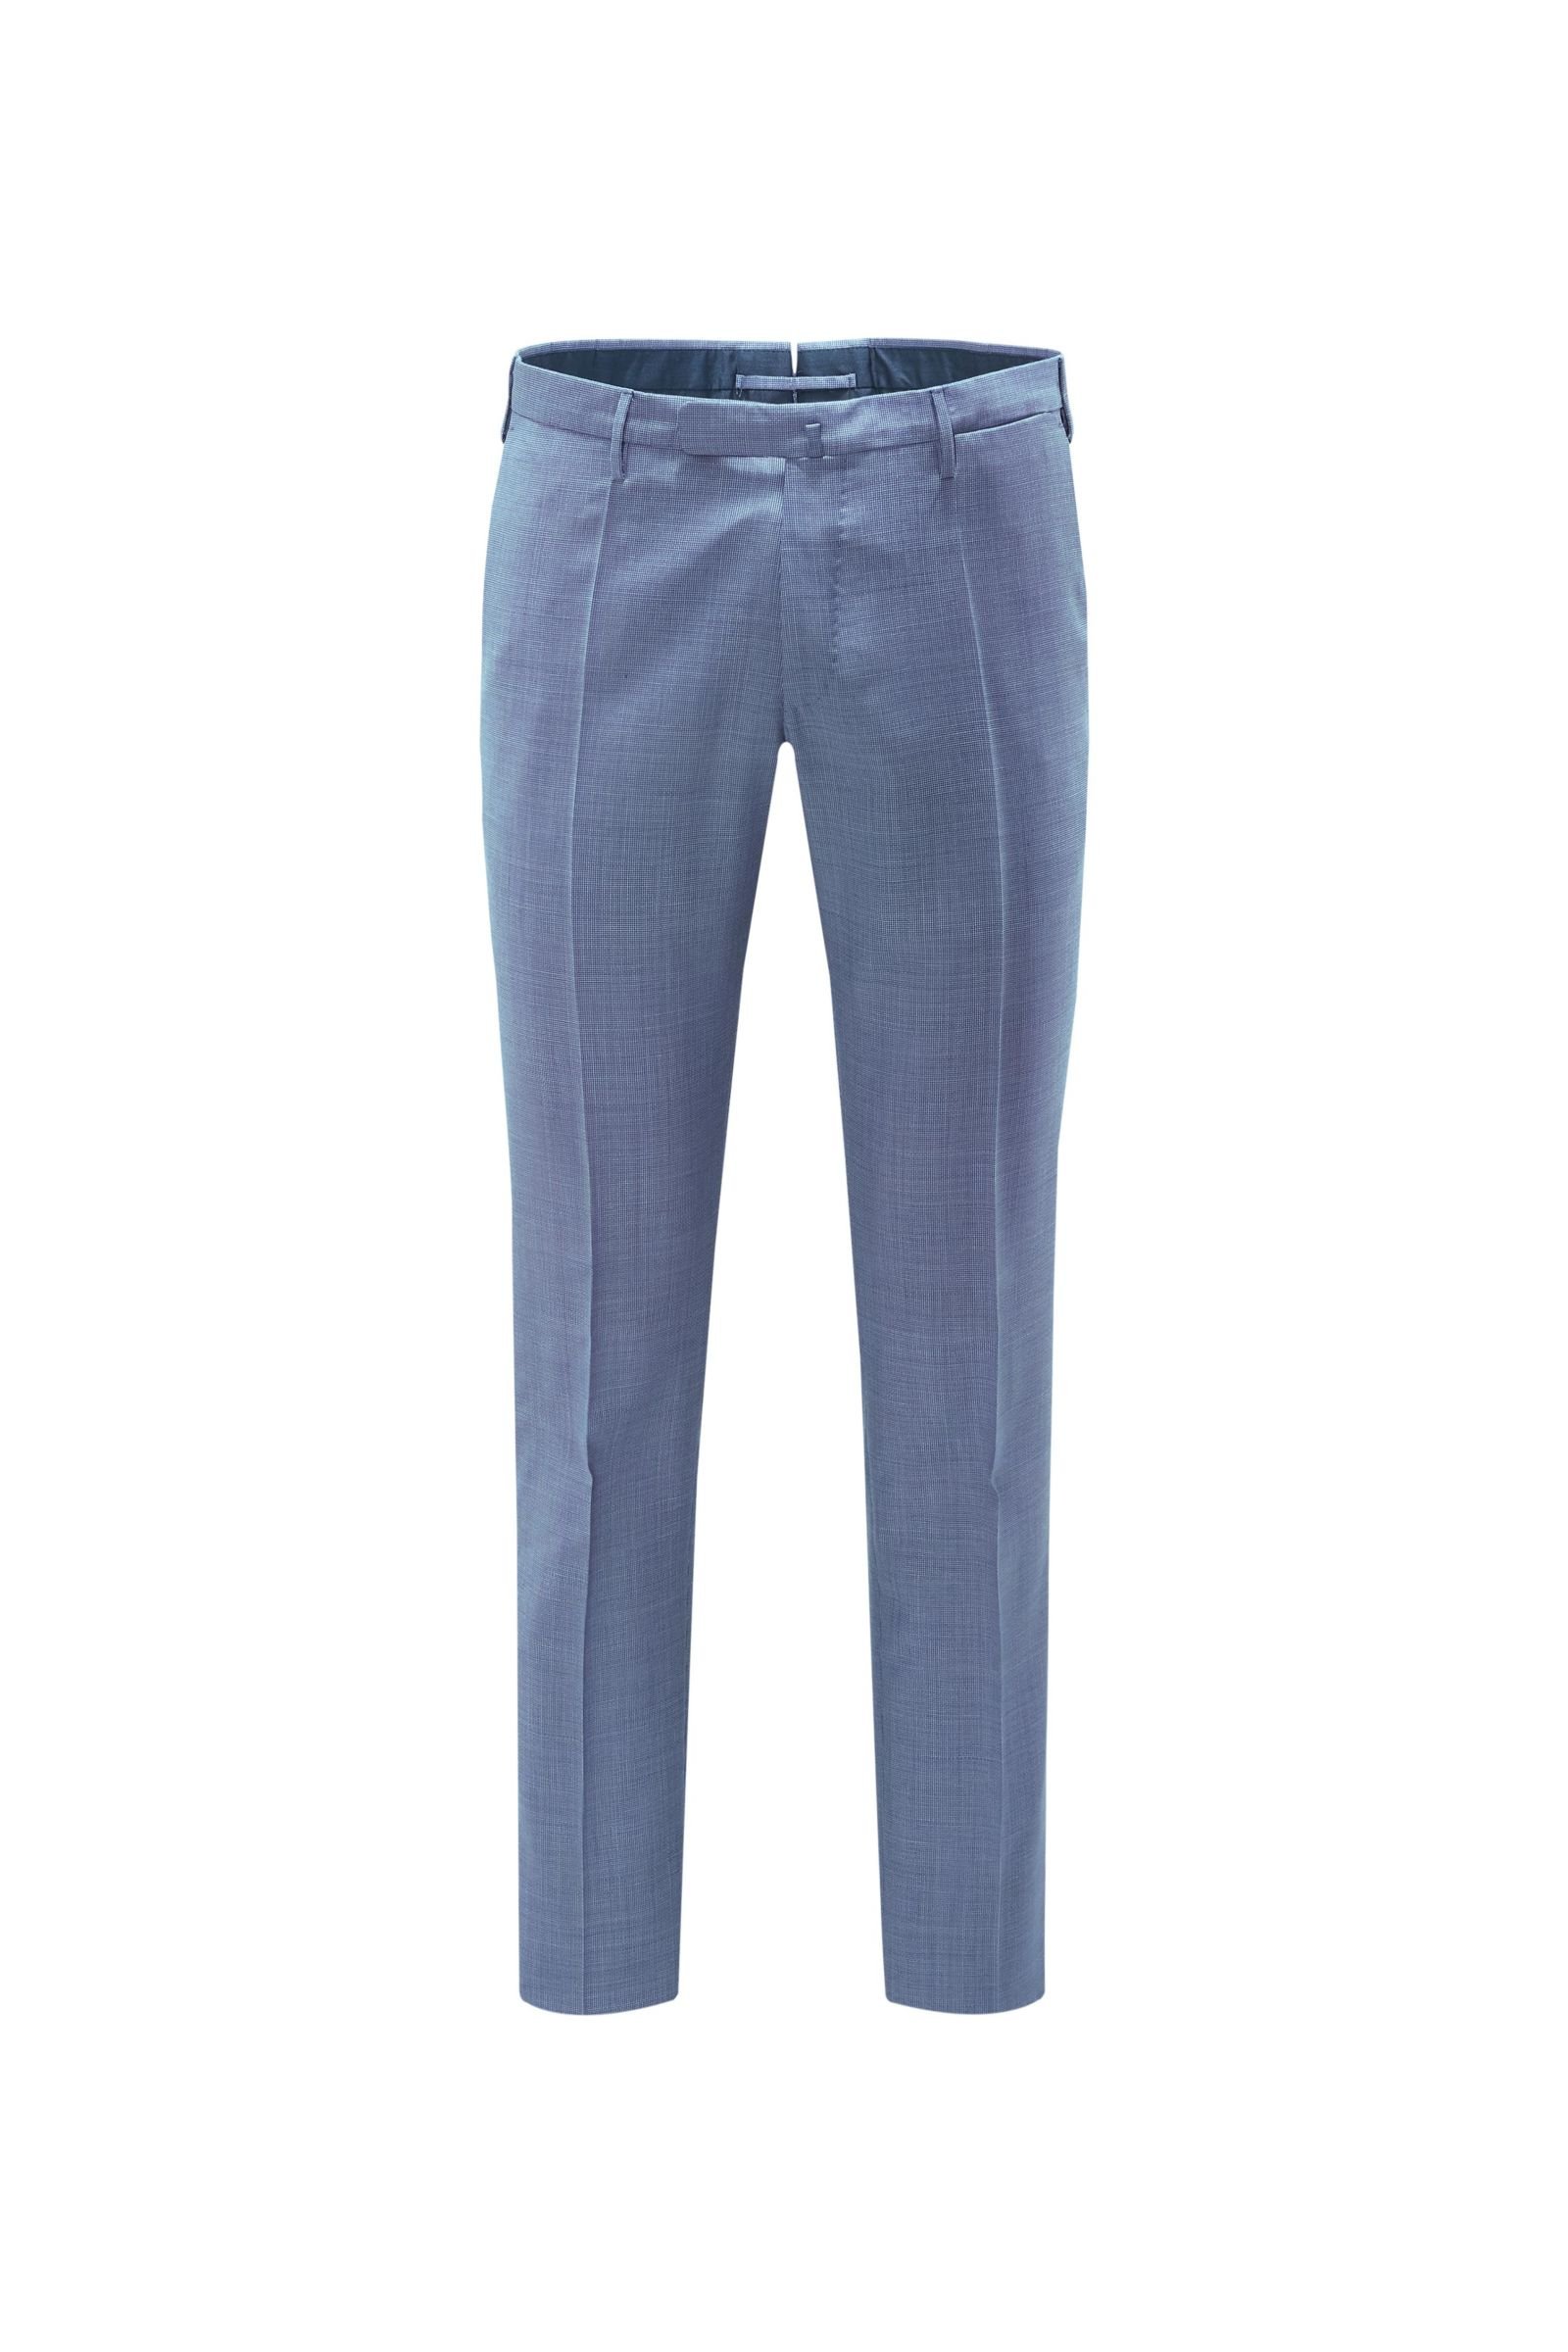 Wool trousers smoky blue patterned